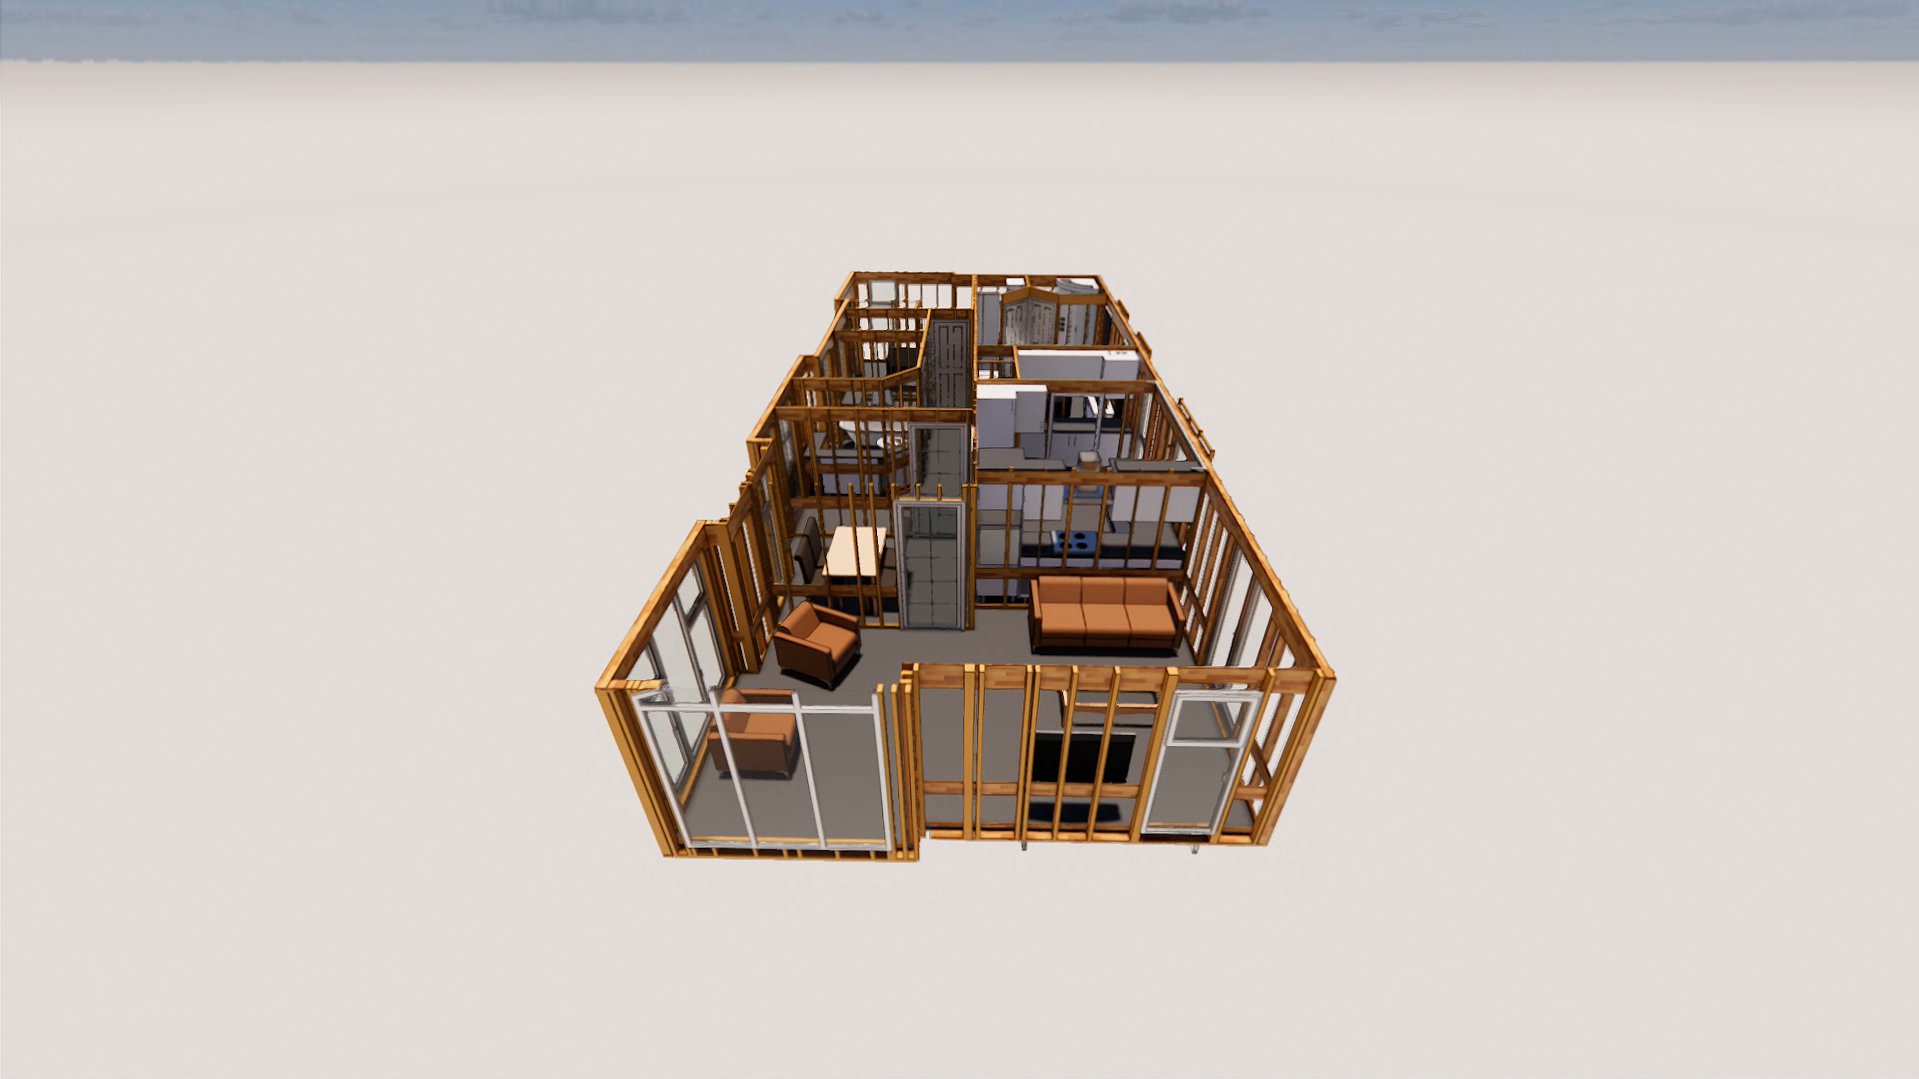 Top view of Prefabricated Park Home, Stately Albion, no walls